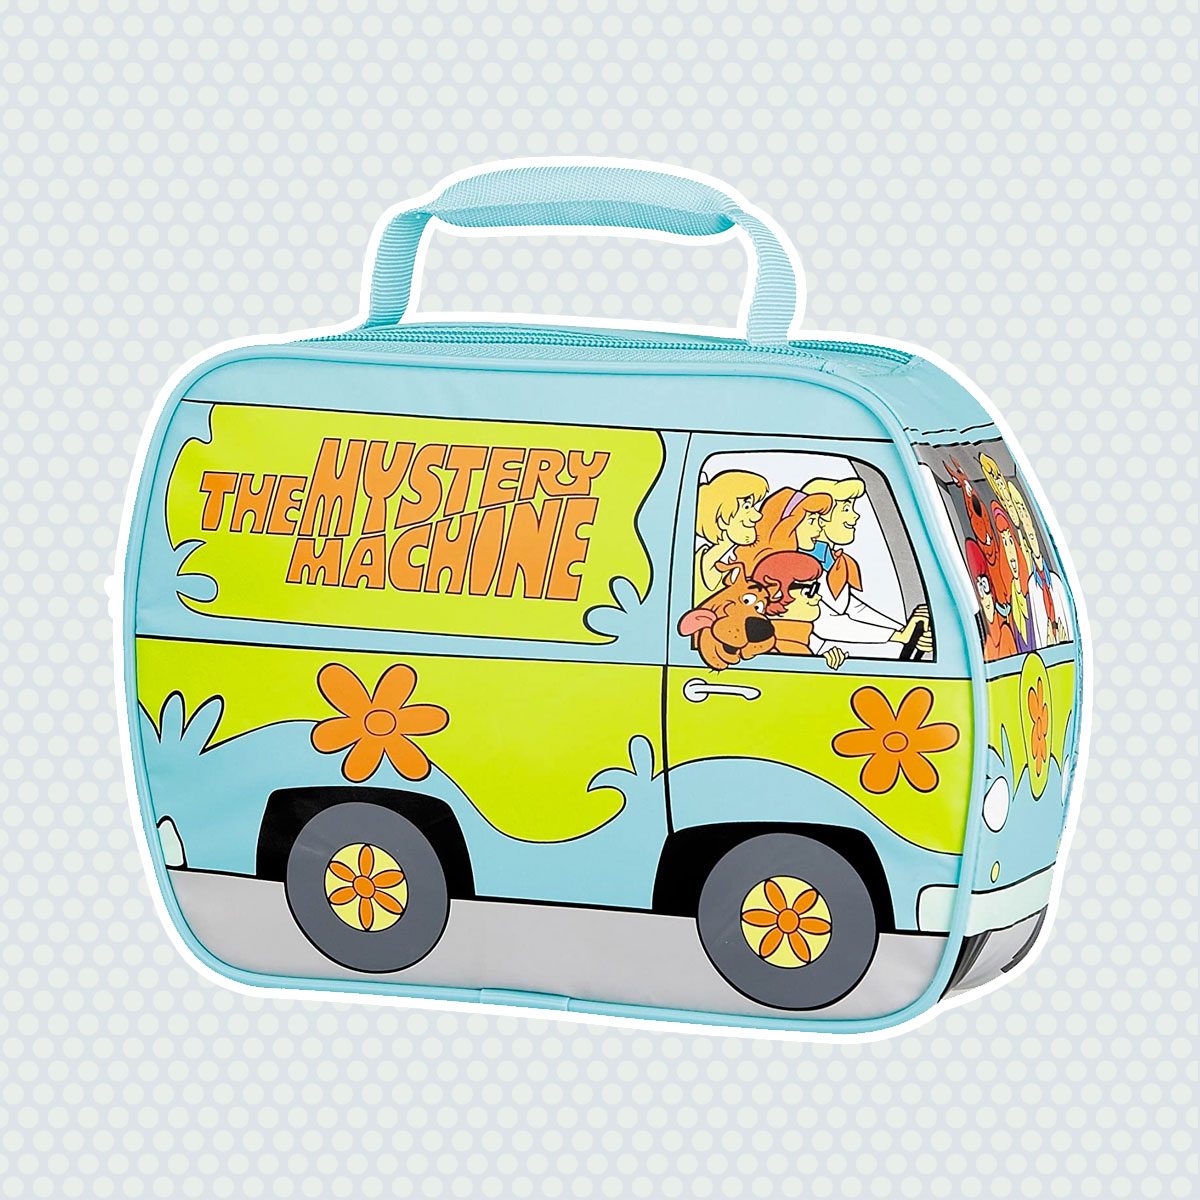 https://www.tasteofhome.com/wp-content/uploads/2018/08/Thermos-Novelty-Scooby-Mystery-Machine.jpg?fit=700%2C700